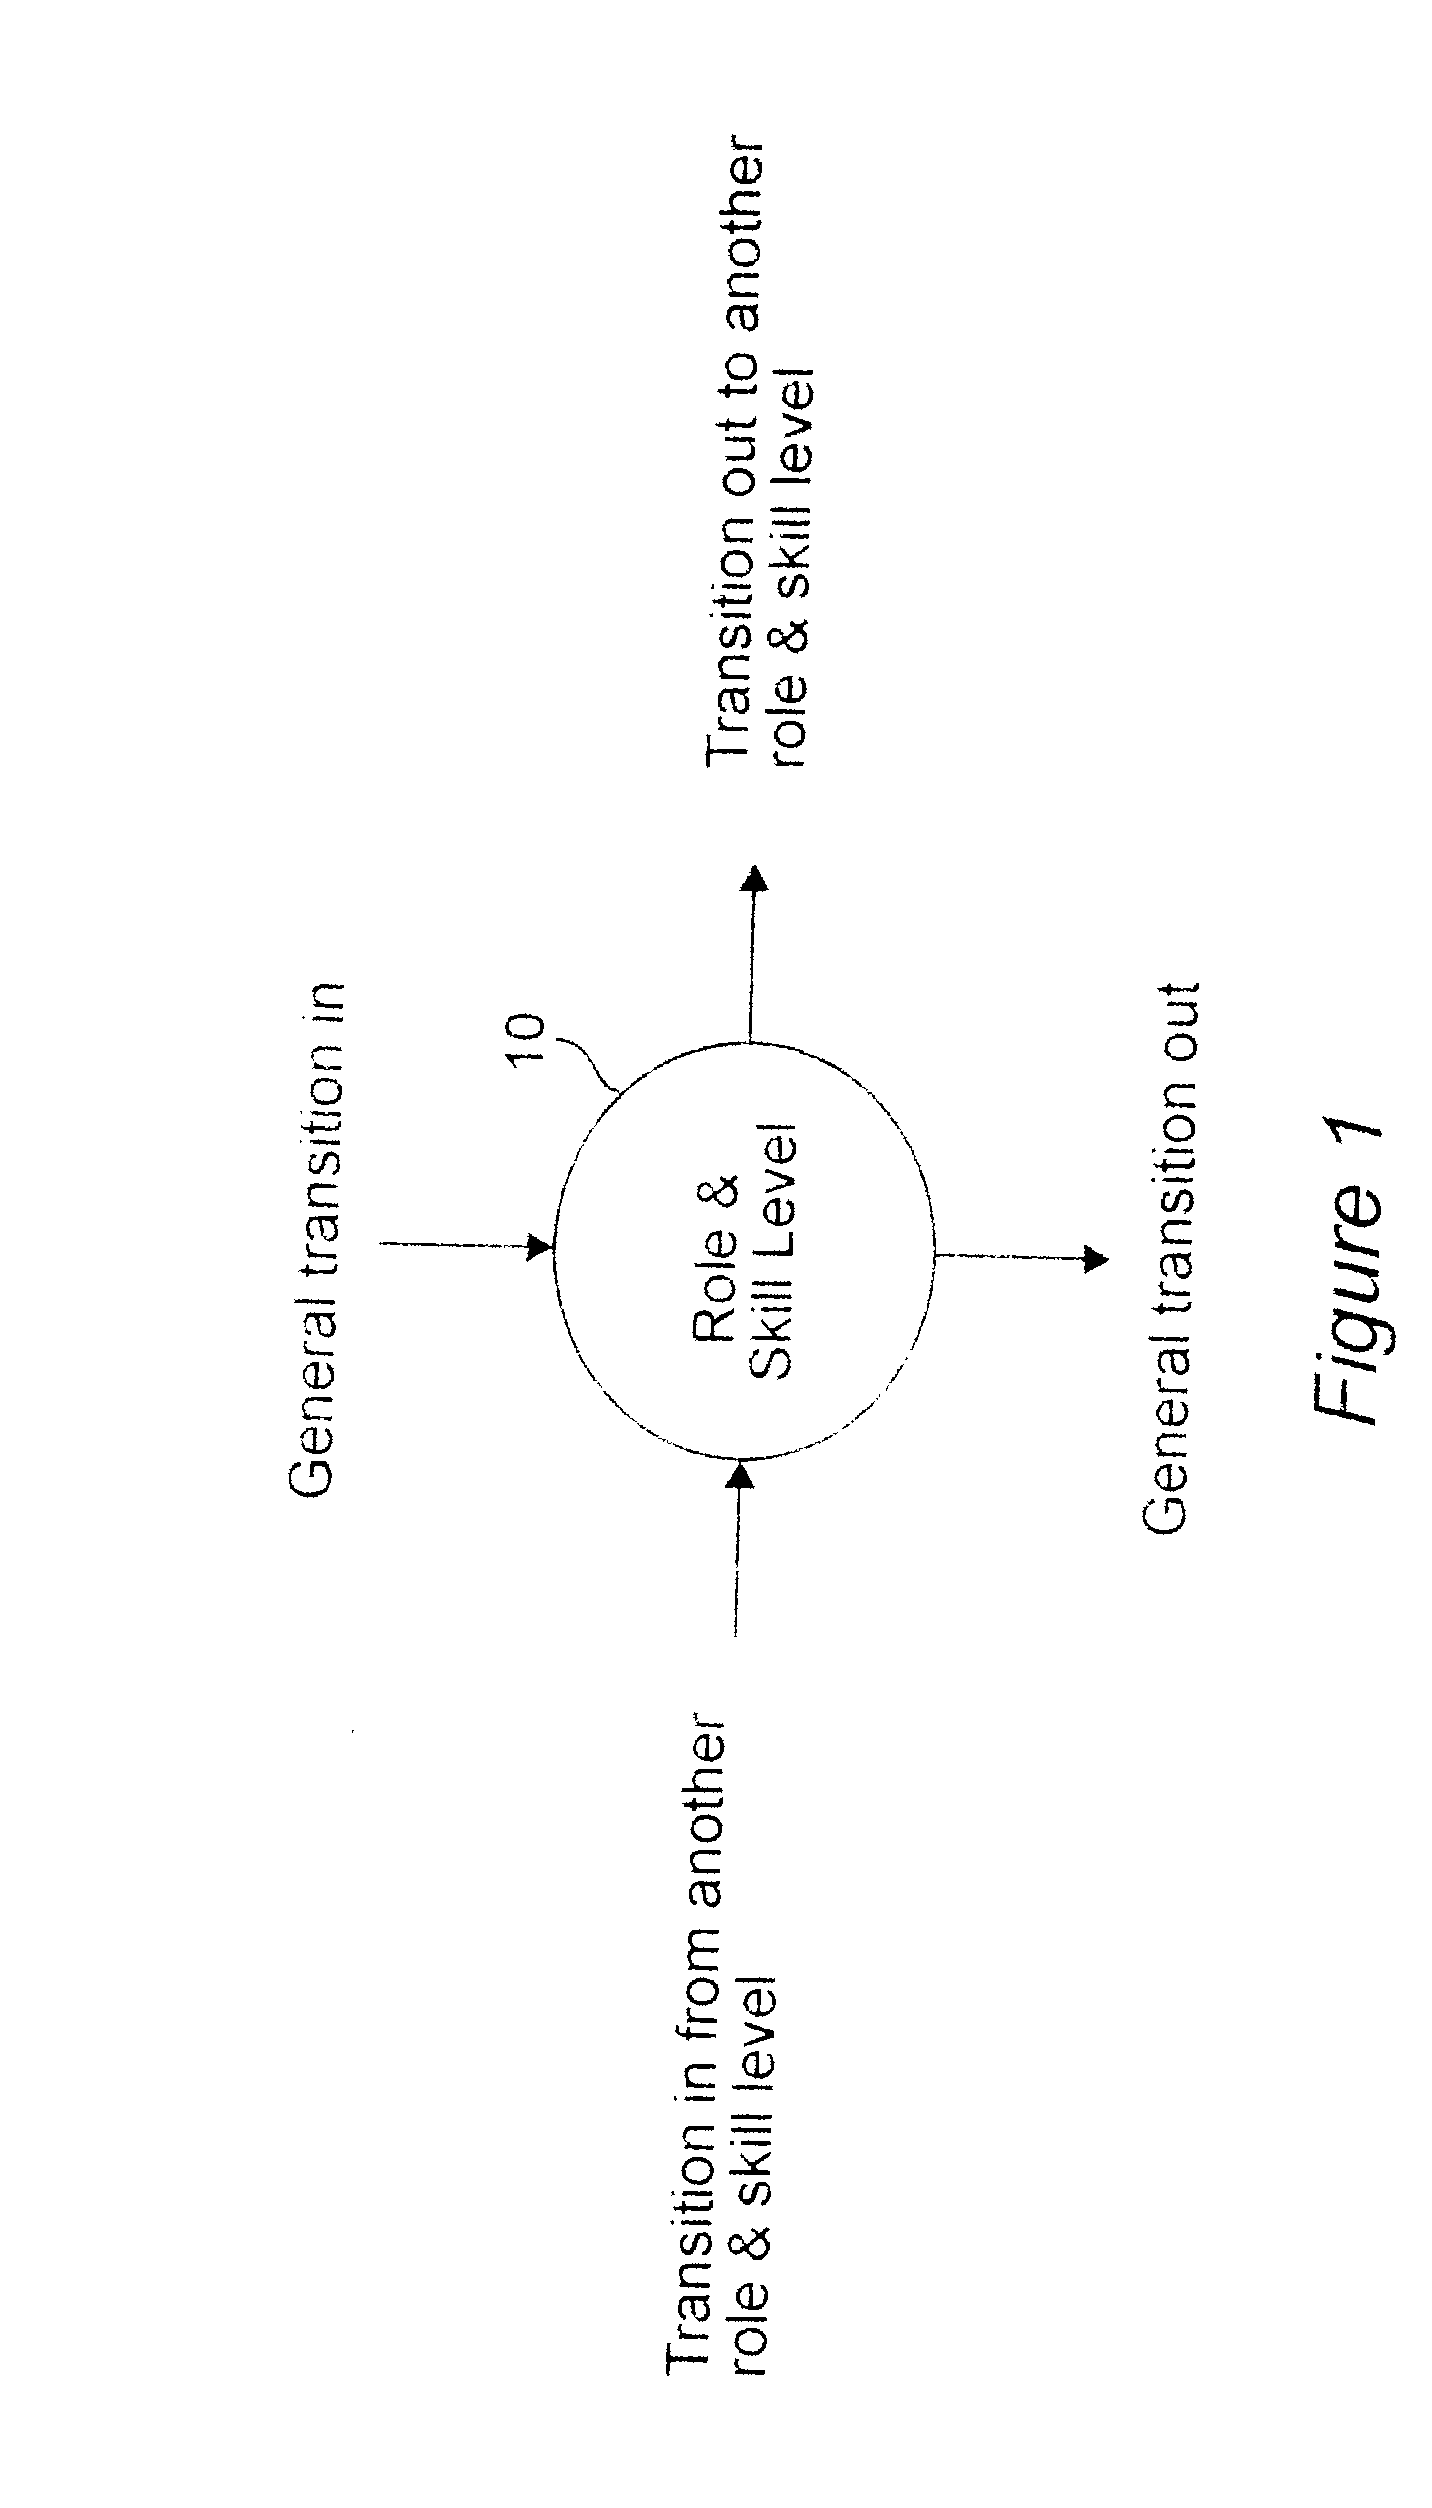 Method and apparatus for designing and planning of workforce evolution